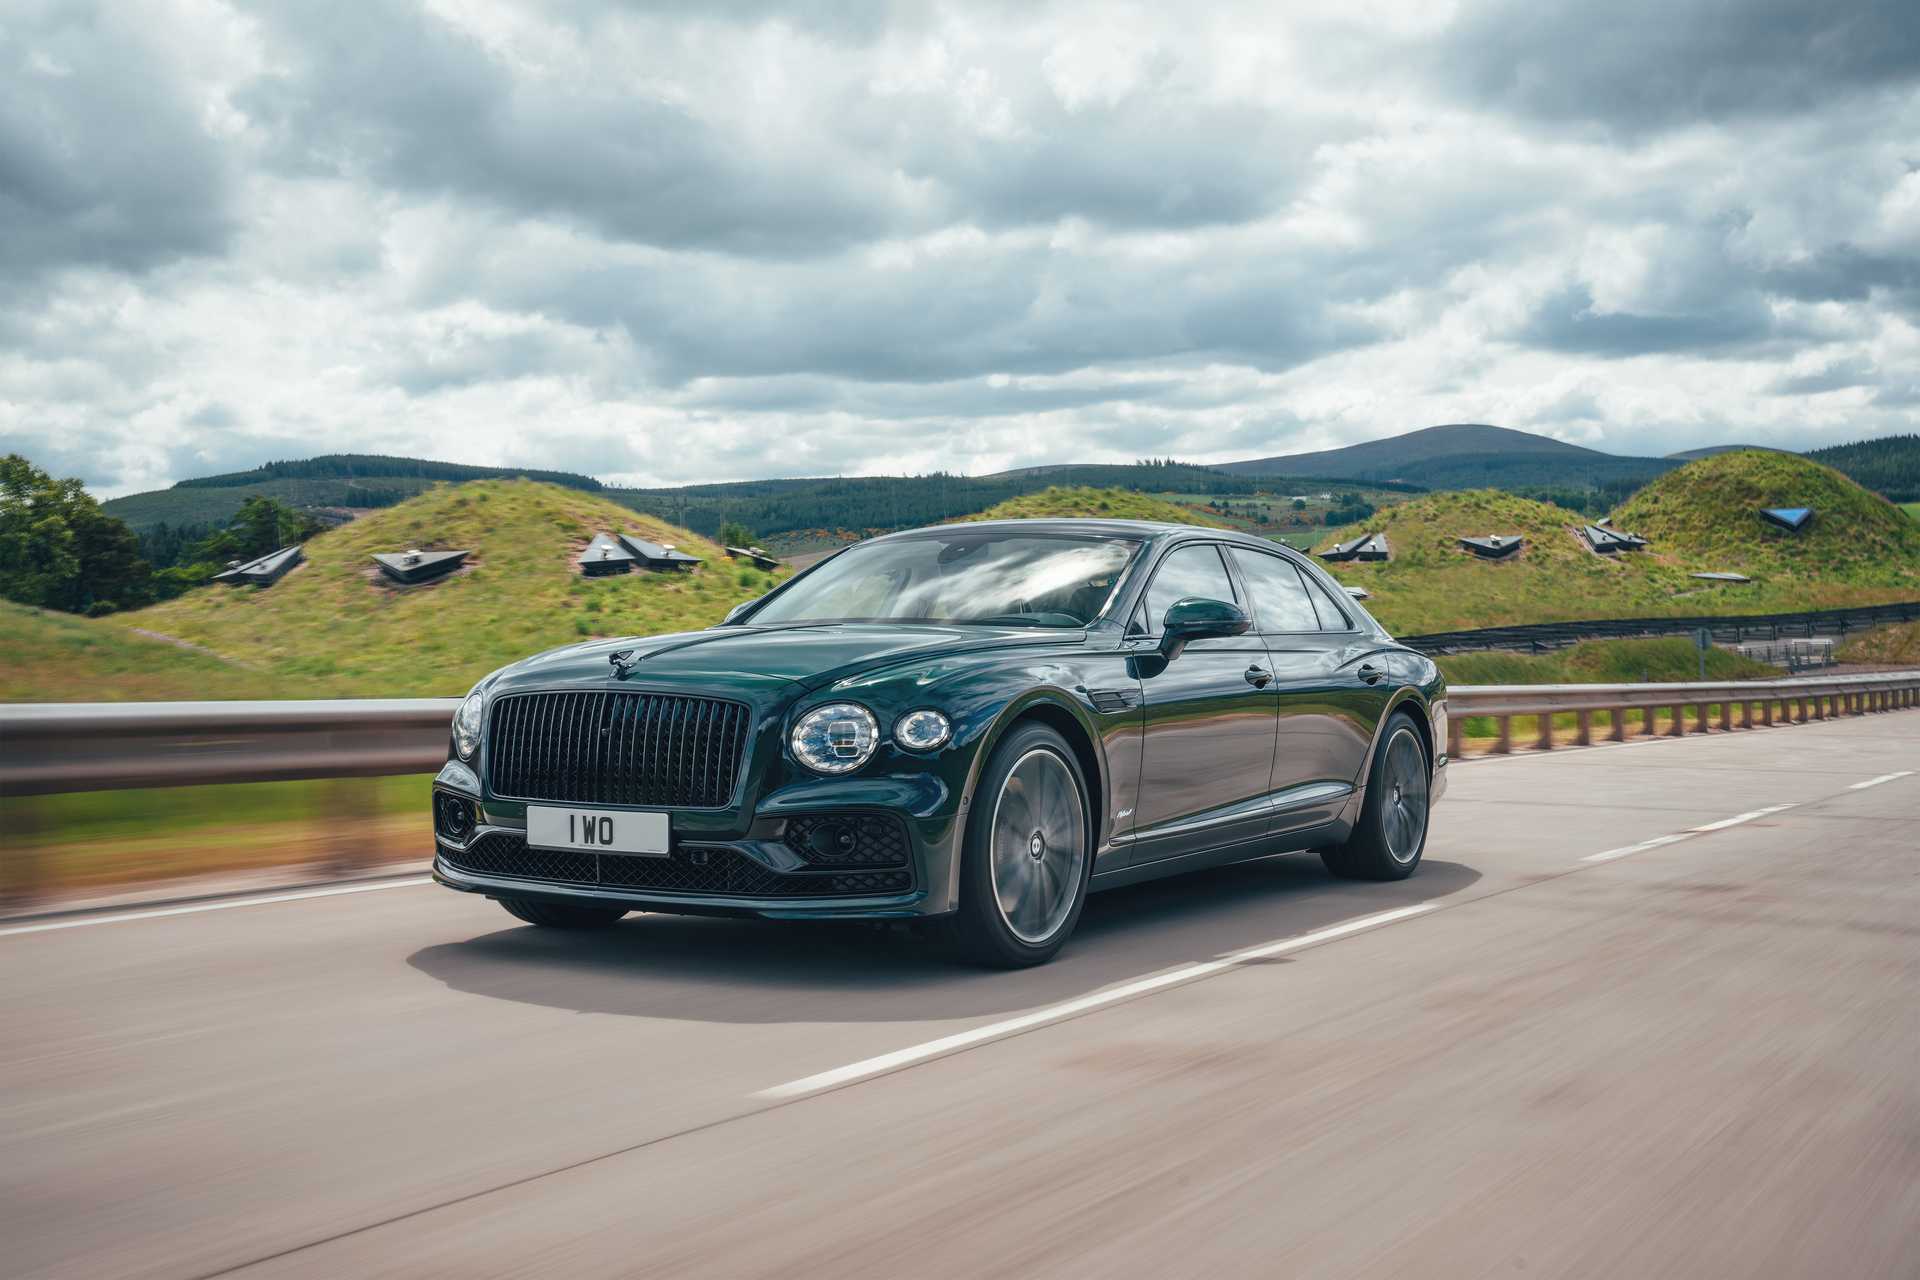 Fichiers Tuning Haute Qualité Bentley Continental Flying Spur 6.0 TSI W12 635hp